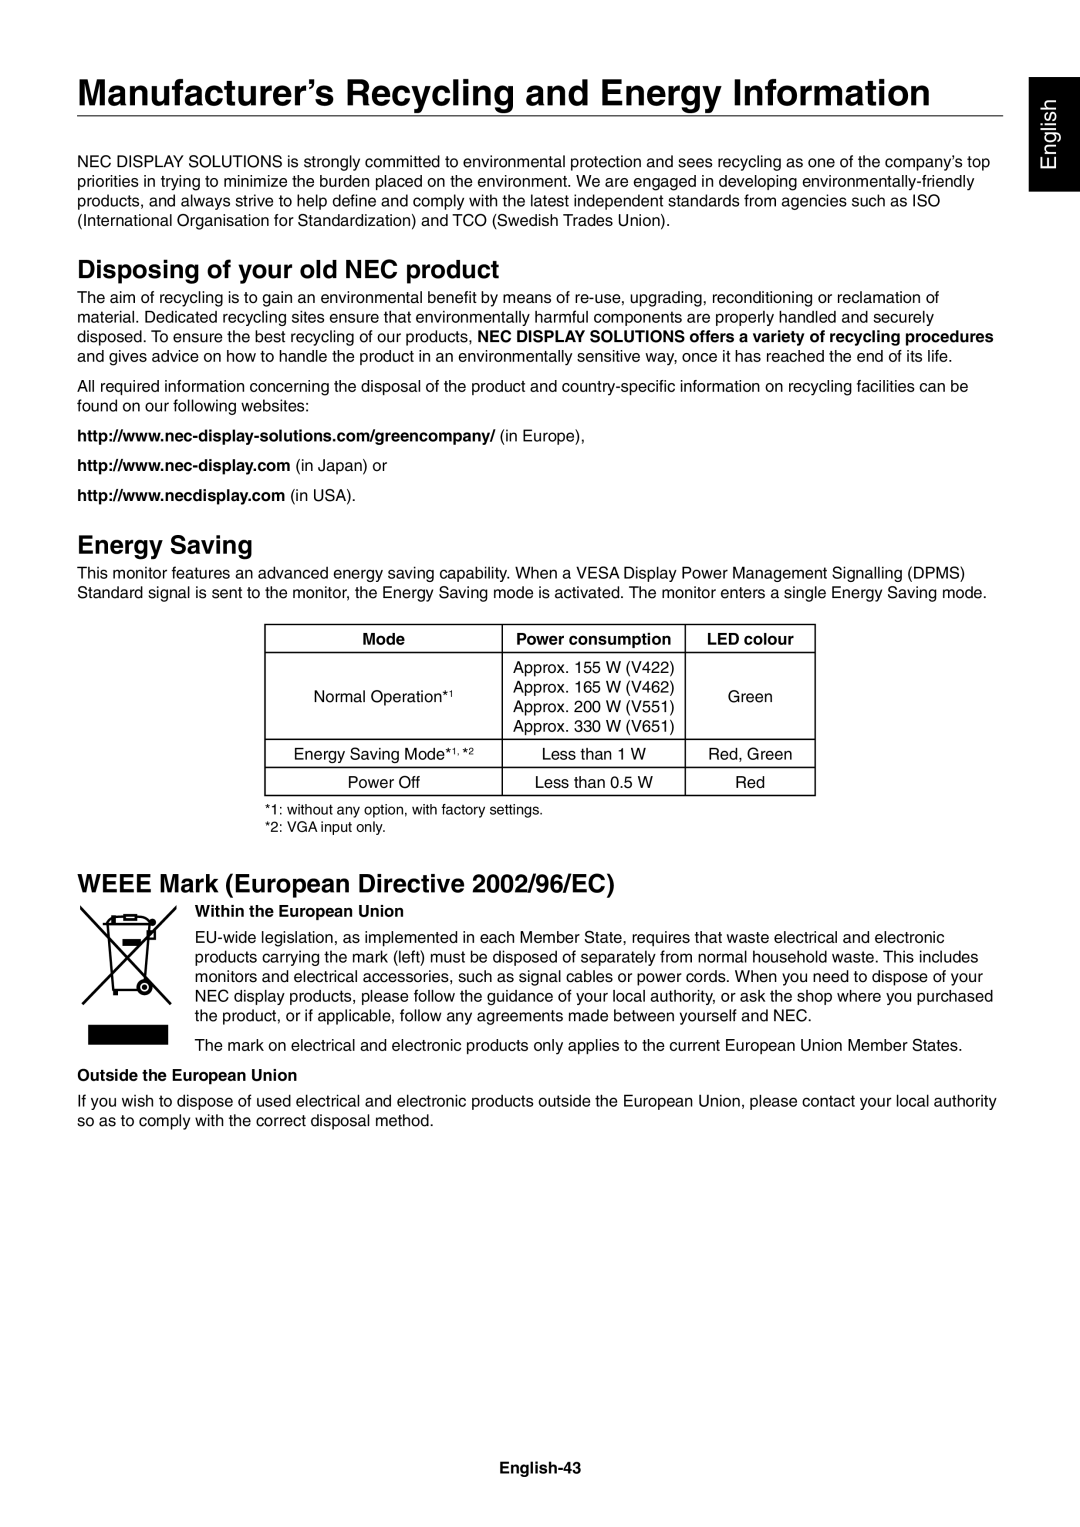 NEC V551 Manufacturer’s Recycling and Energy Information, Disposing of your old NEC product, Energy Saving, Mode, English 